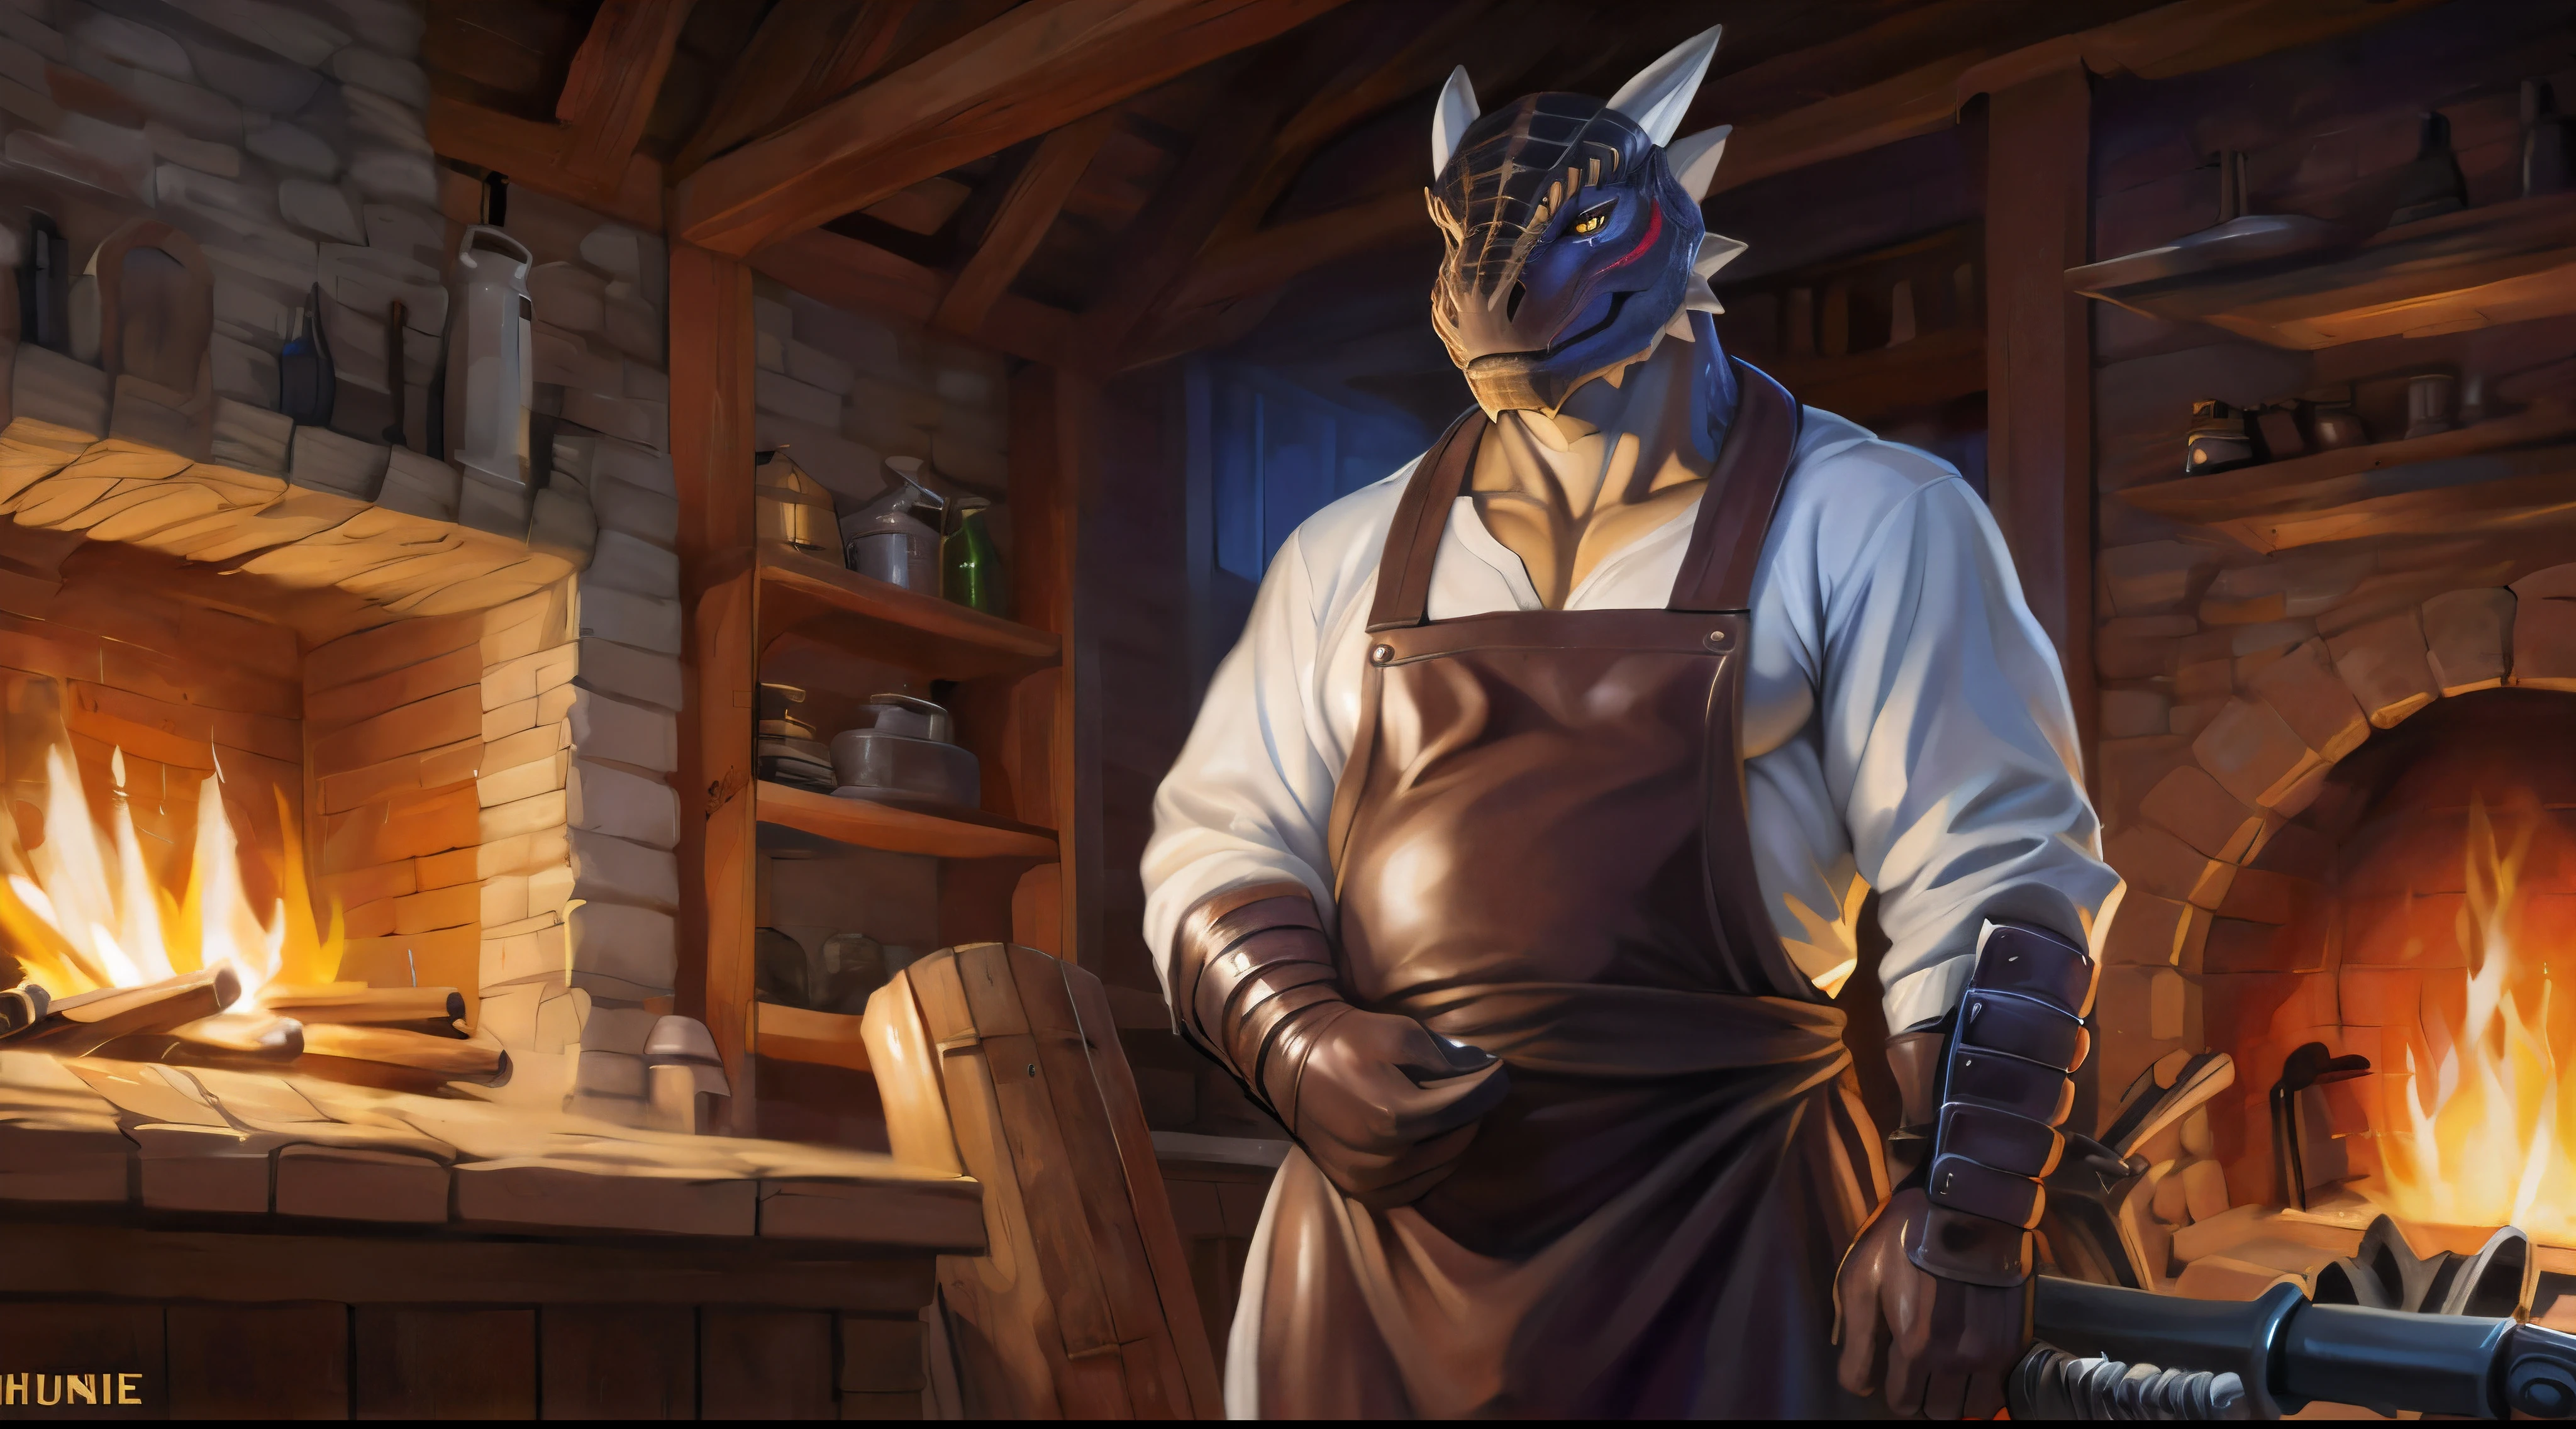 (kemono, by chunie, by narse, by dagasi, by syuro), male, 1boy, argonian, black scales, shine eyes, handsome face, blacksmith, day, dim, detailed eyes, fat, musclegut, detailed clothing, ((dark brown leather blacksmith's apron)), sweat, musk, (old, dad, daddy, old man, 50-year-old middle-aged man, an old argonian blacksmith who forges a weapon), tall, huge bulge, ((sweat)), ((musk)), pecs, detailed nipple piercings, masterpiecedetailed body, detailed scales, (detailed eyes), (detailed hands), Highest Quality, 4k, masterpiece, Amazing Details, Shallow Depth of Field, (masutepiece, Best Quality, Clear image quality, hight resolution,４K image quality), background: a forge, a smithy, fire, charcoal, anvil, weapons rack, armors rack,